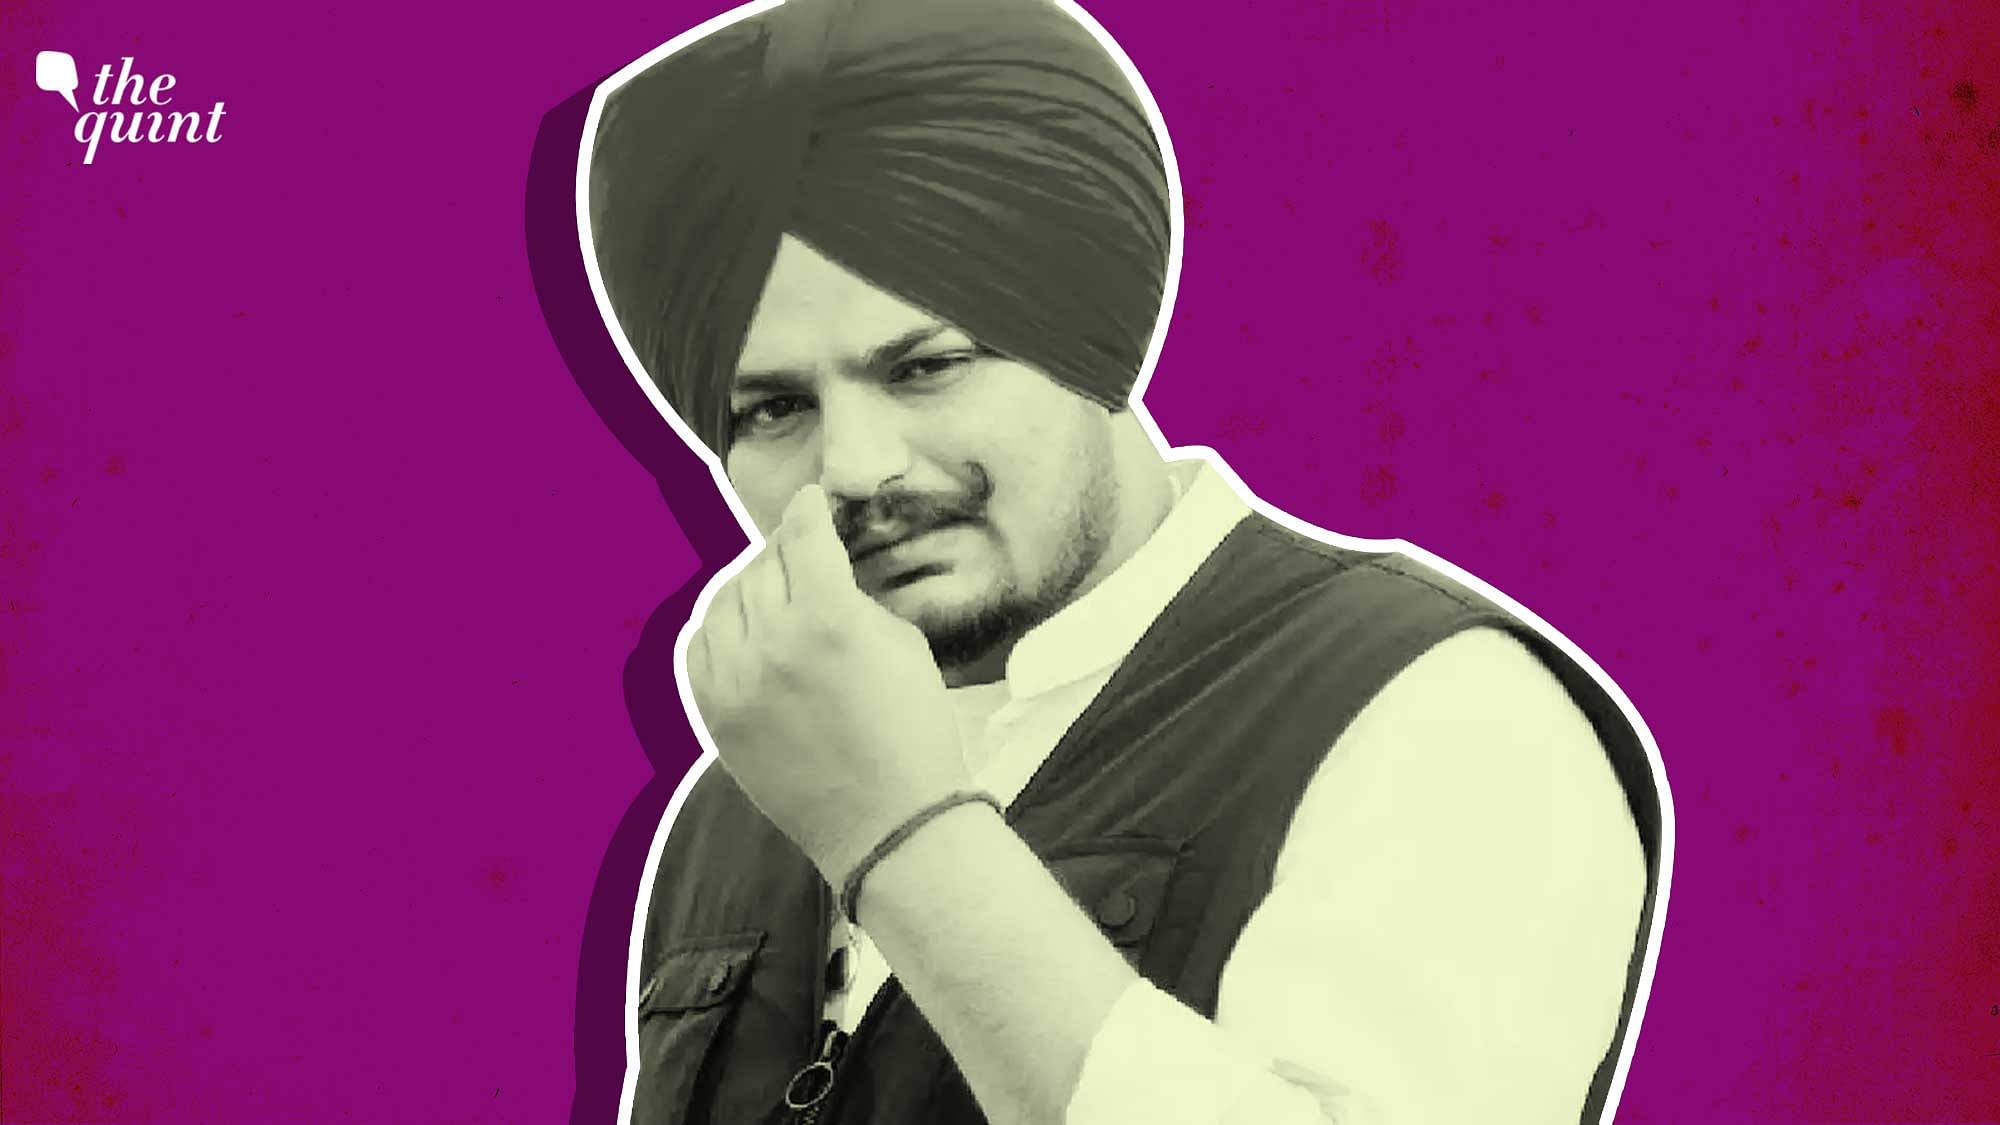 <div class="paragraphs"><p>A Punjabi singing sensation with fans across the globe, <a href="https://www.thequint.com/news/india/punjabi-singer-congress-sidhu-moose-wala-shot-at-punjab-mansa">Sidhu Moose Wala</a> made his electoral debut earlier this year as a <a href="https://www.thequint.com/news/politics/punjabi-singer-sidhu-moose-wala-congress">Congress candidate</a> from Punjab's Mansa in the state Assembly elections.</p></div>